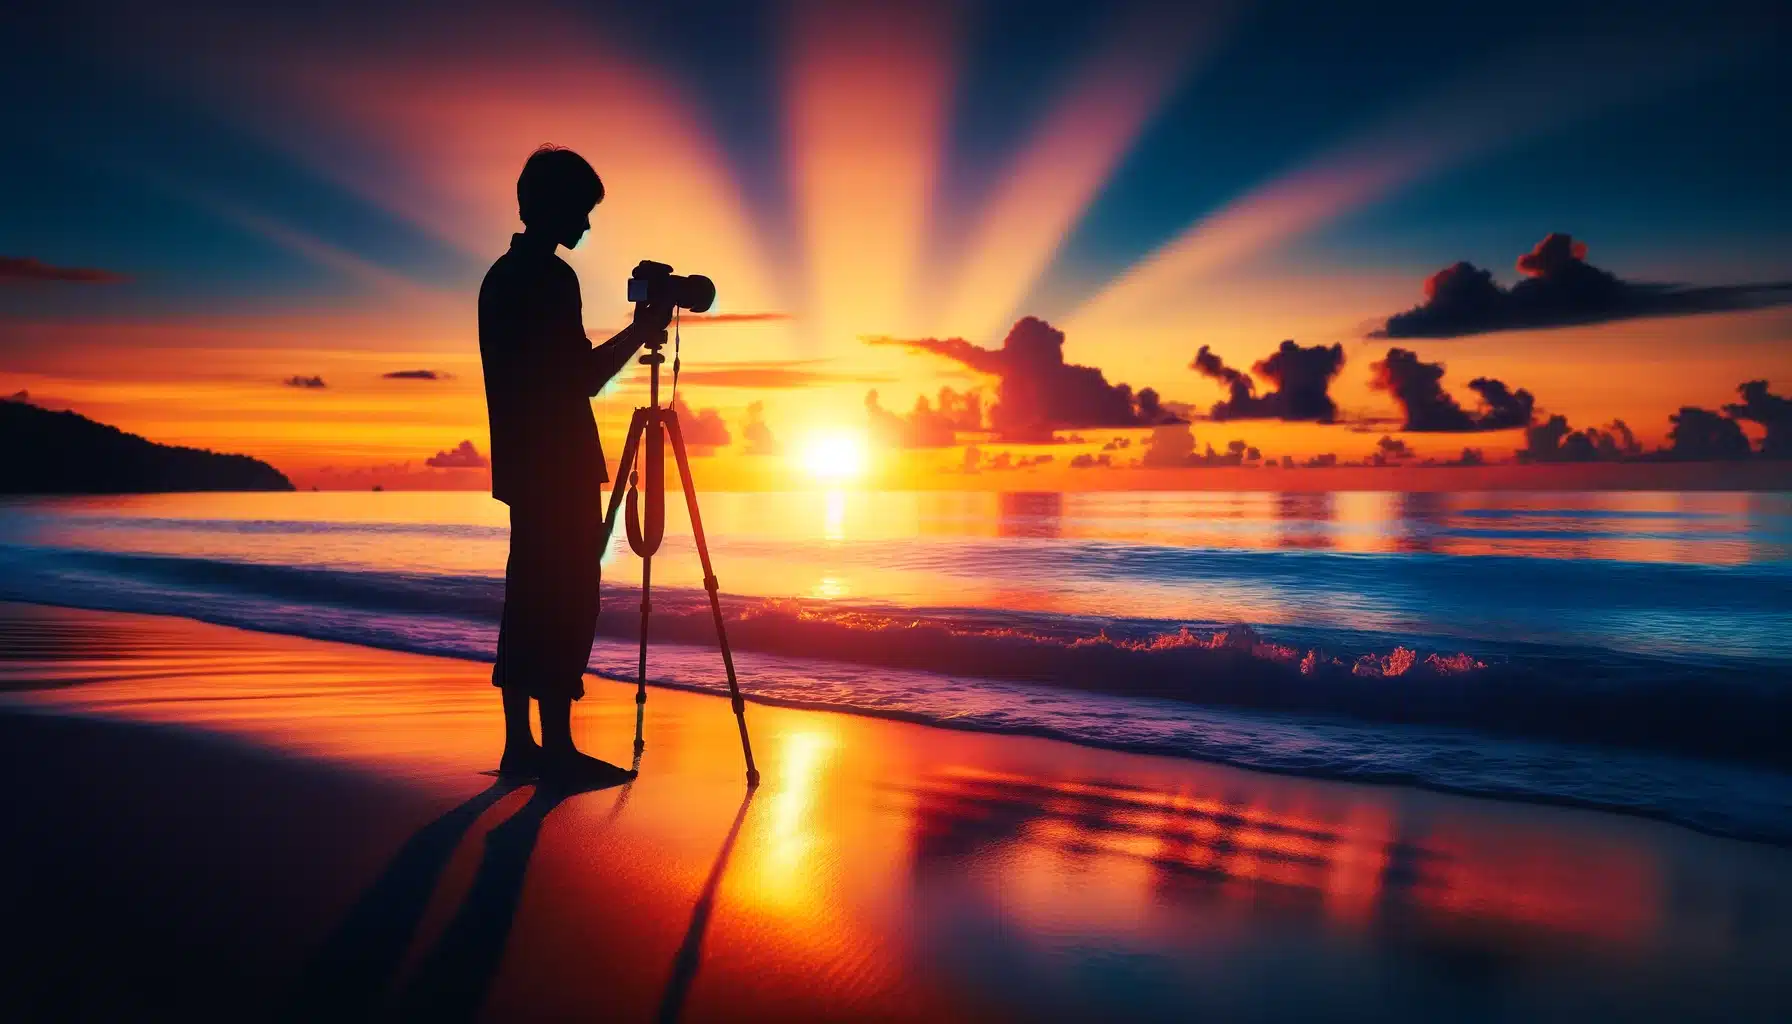 A stunning sunset scene on a beach featuring a person taking silhouette photos with a camera on a tripod, capturing the vibrant colors of the sky and the silhouette of a subject.